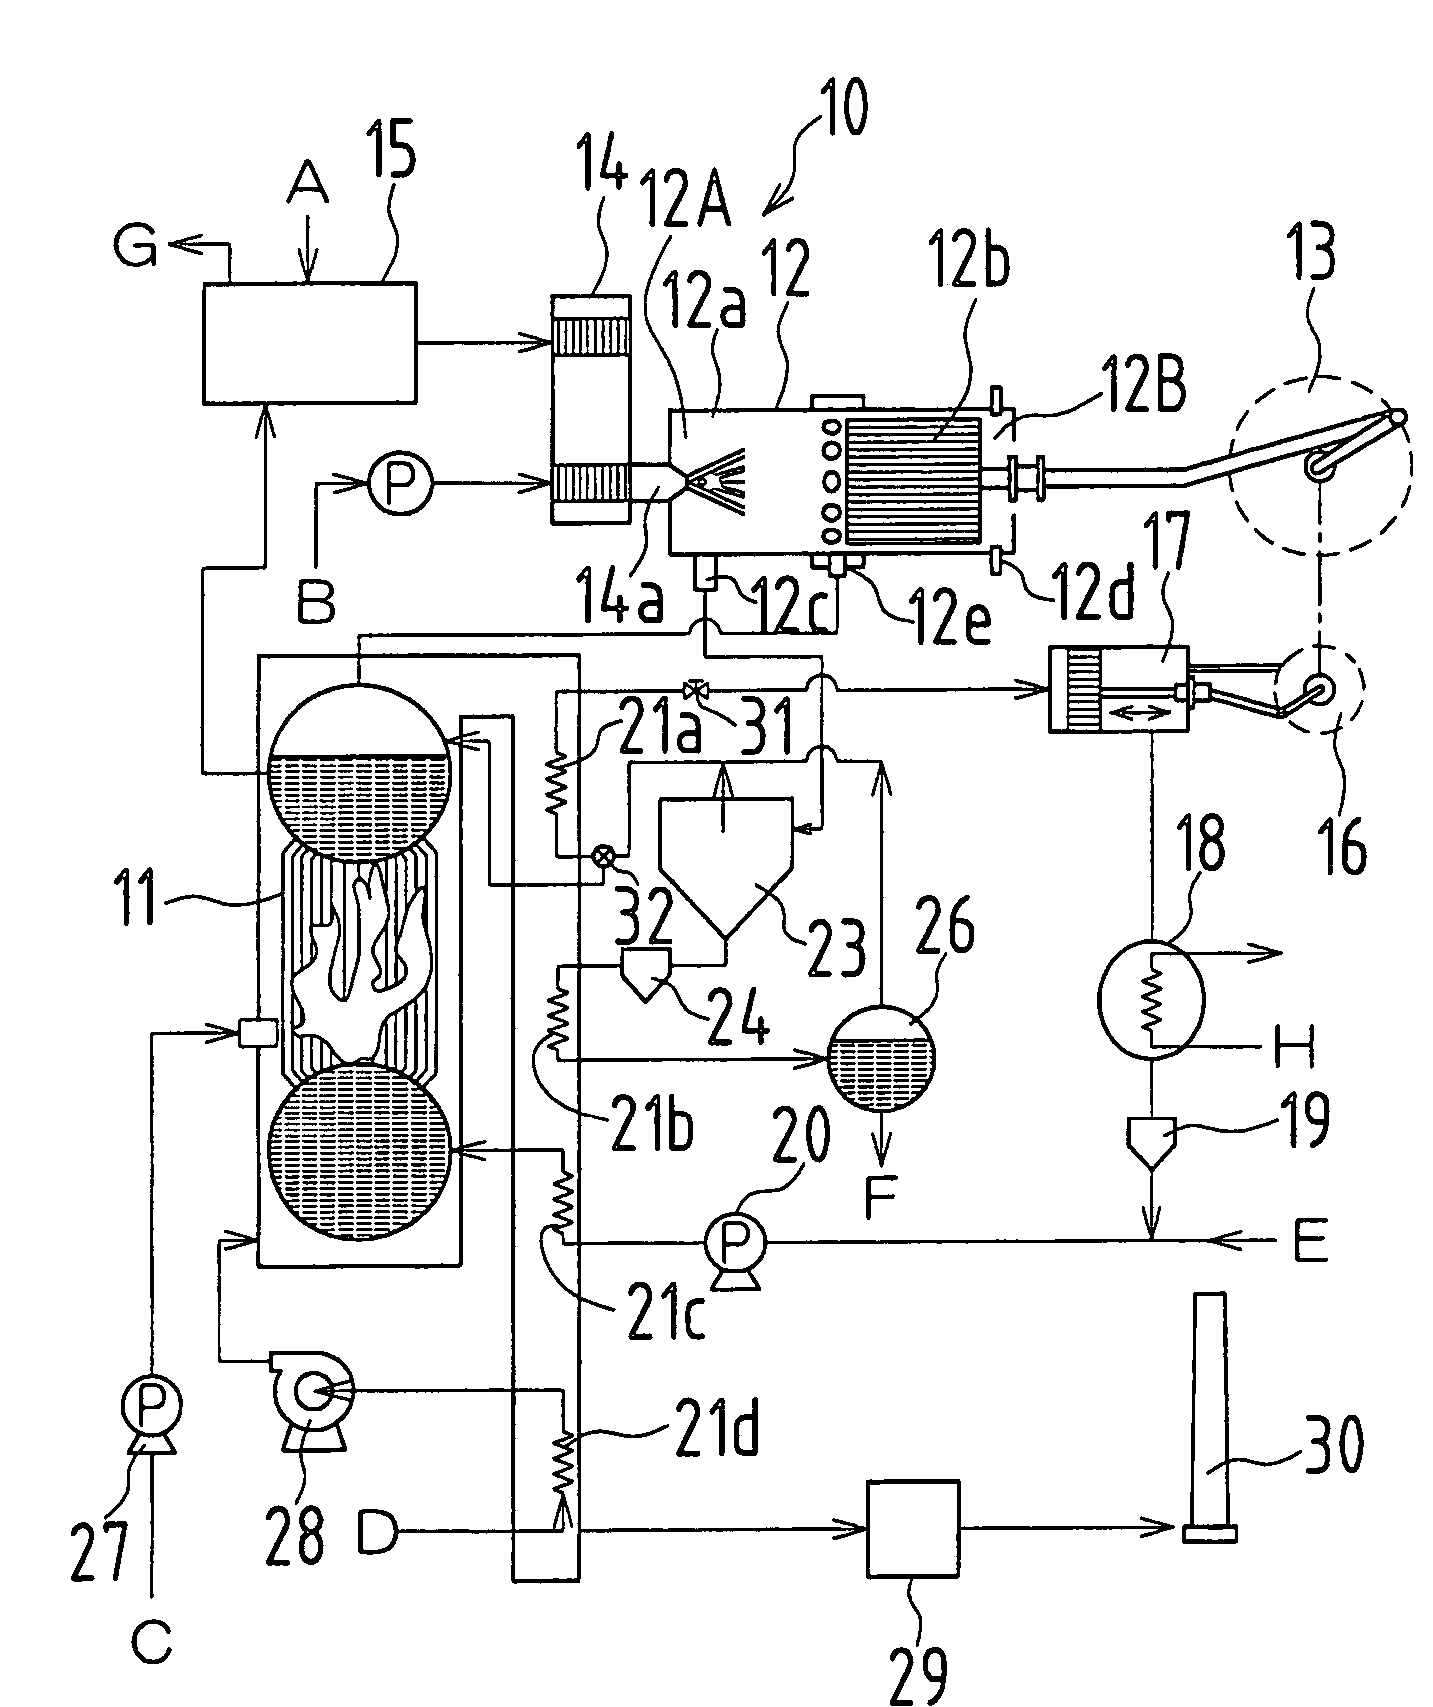 Reaction apparatus for organic and/or other substances employing supercritical fluid or subcritical fluid